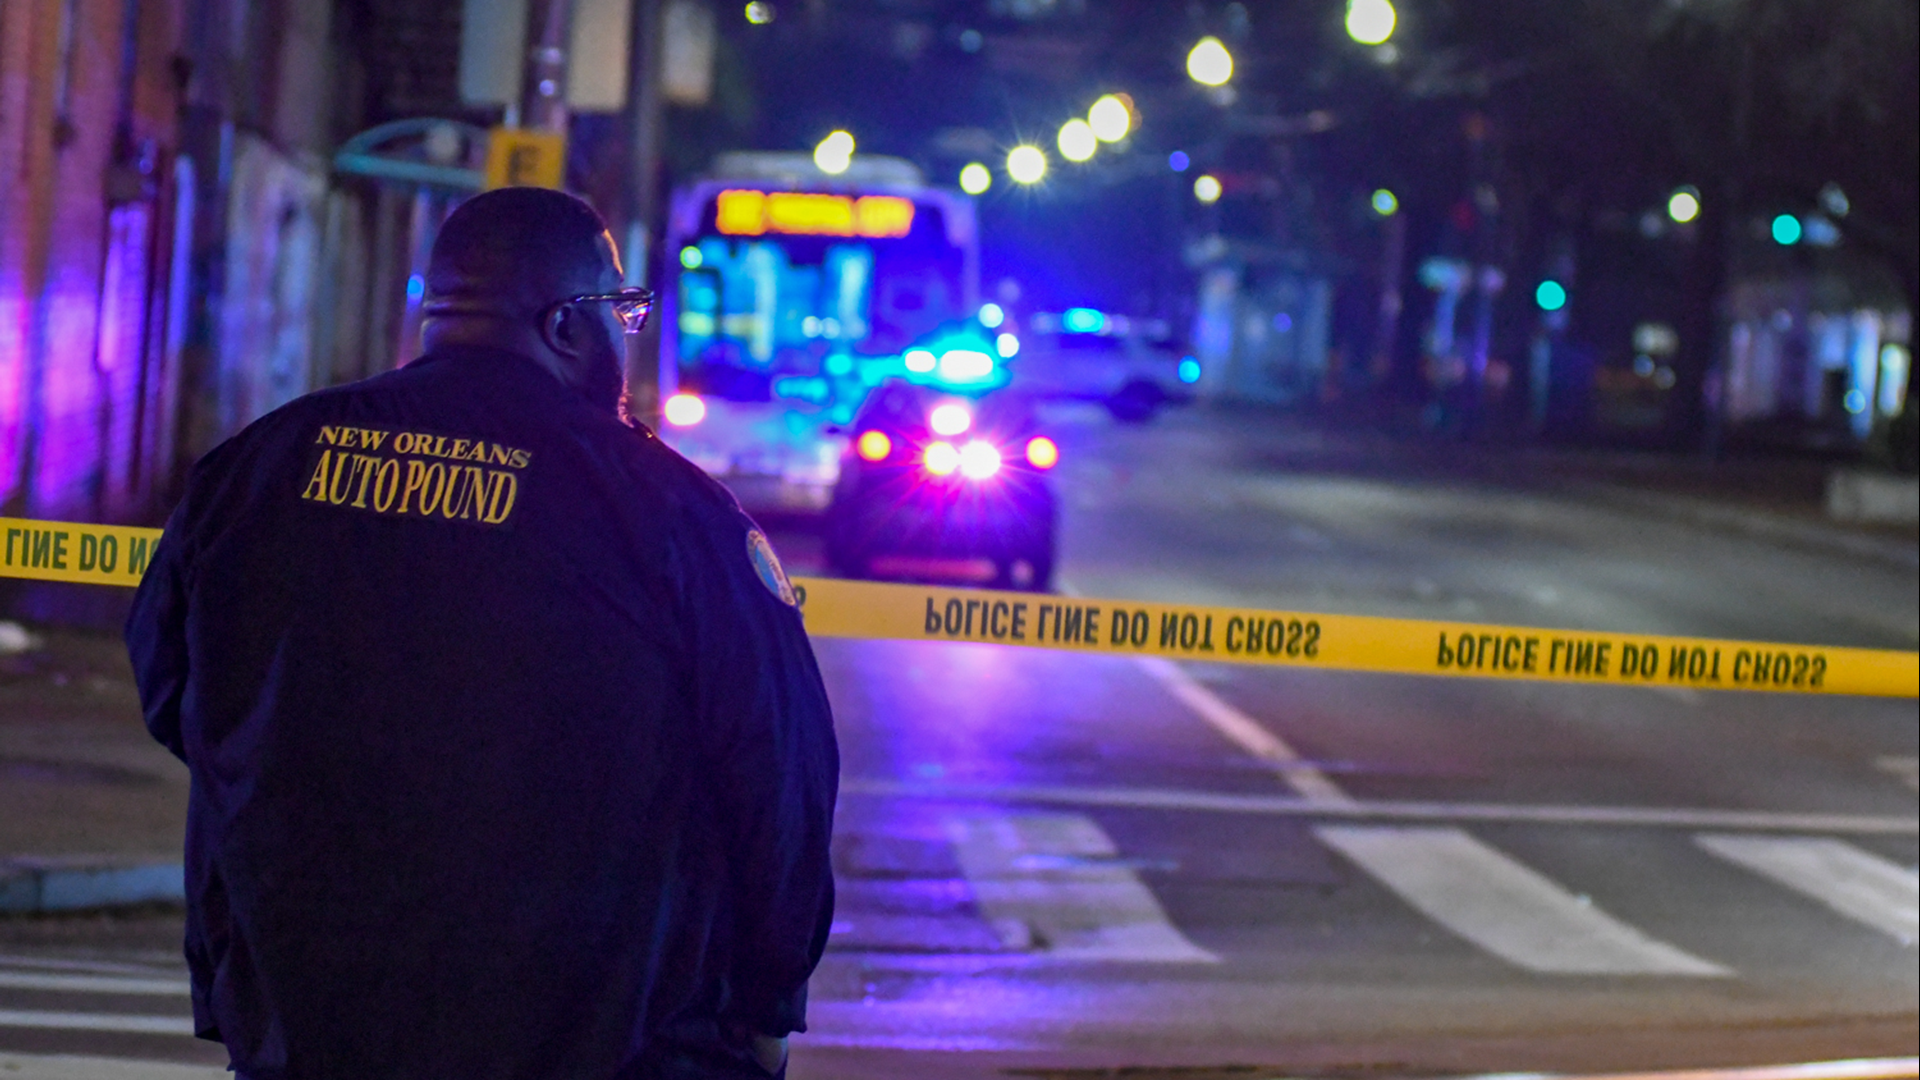 Five people waiting at a bus stop were wounded Sunday after police exchanged gunfire with an armed robbery suspect in downtown New Orleans.